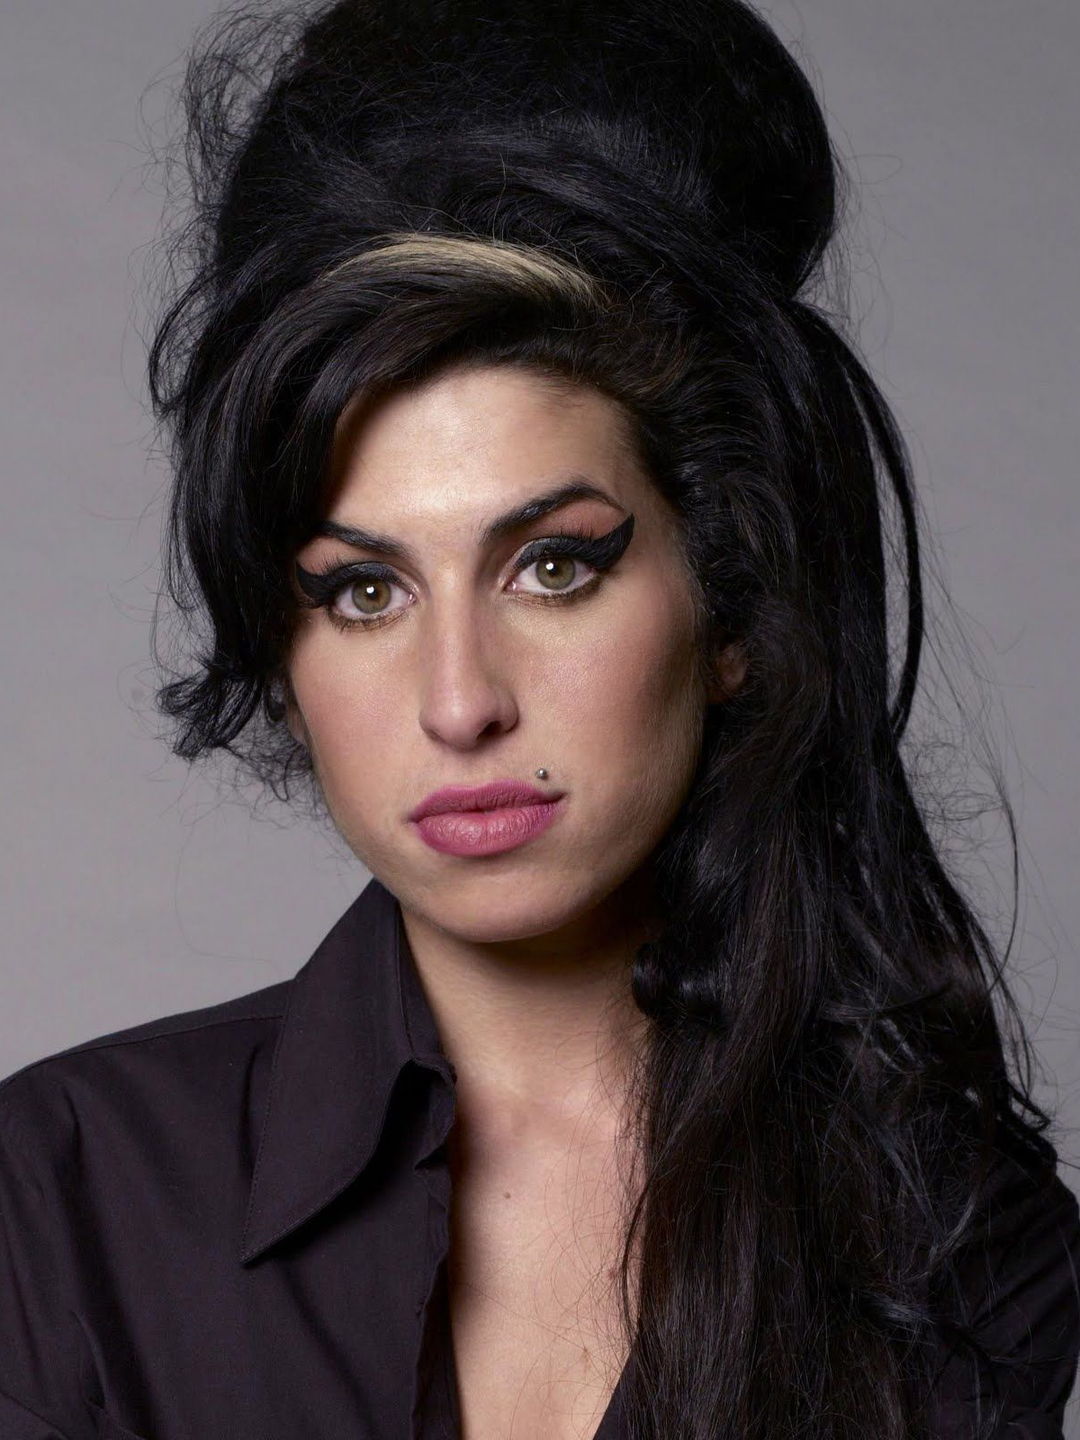 Amy Winehouse early life